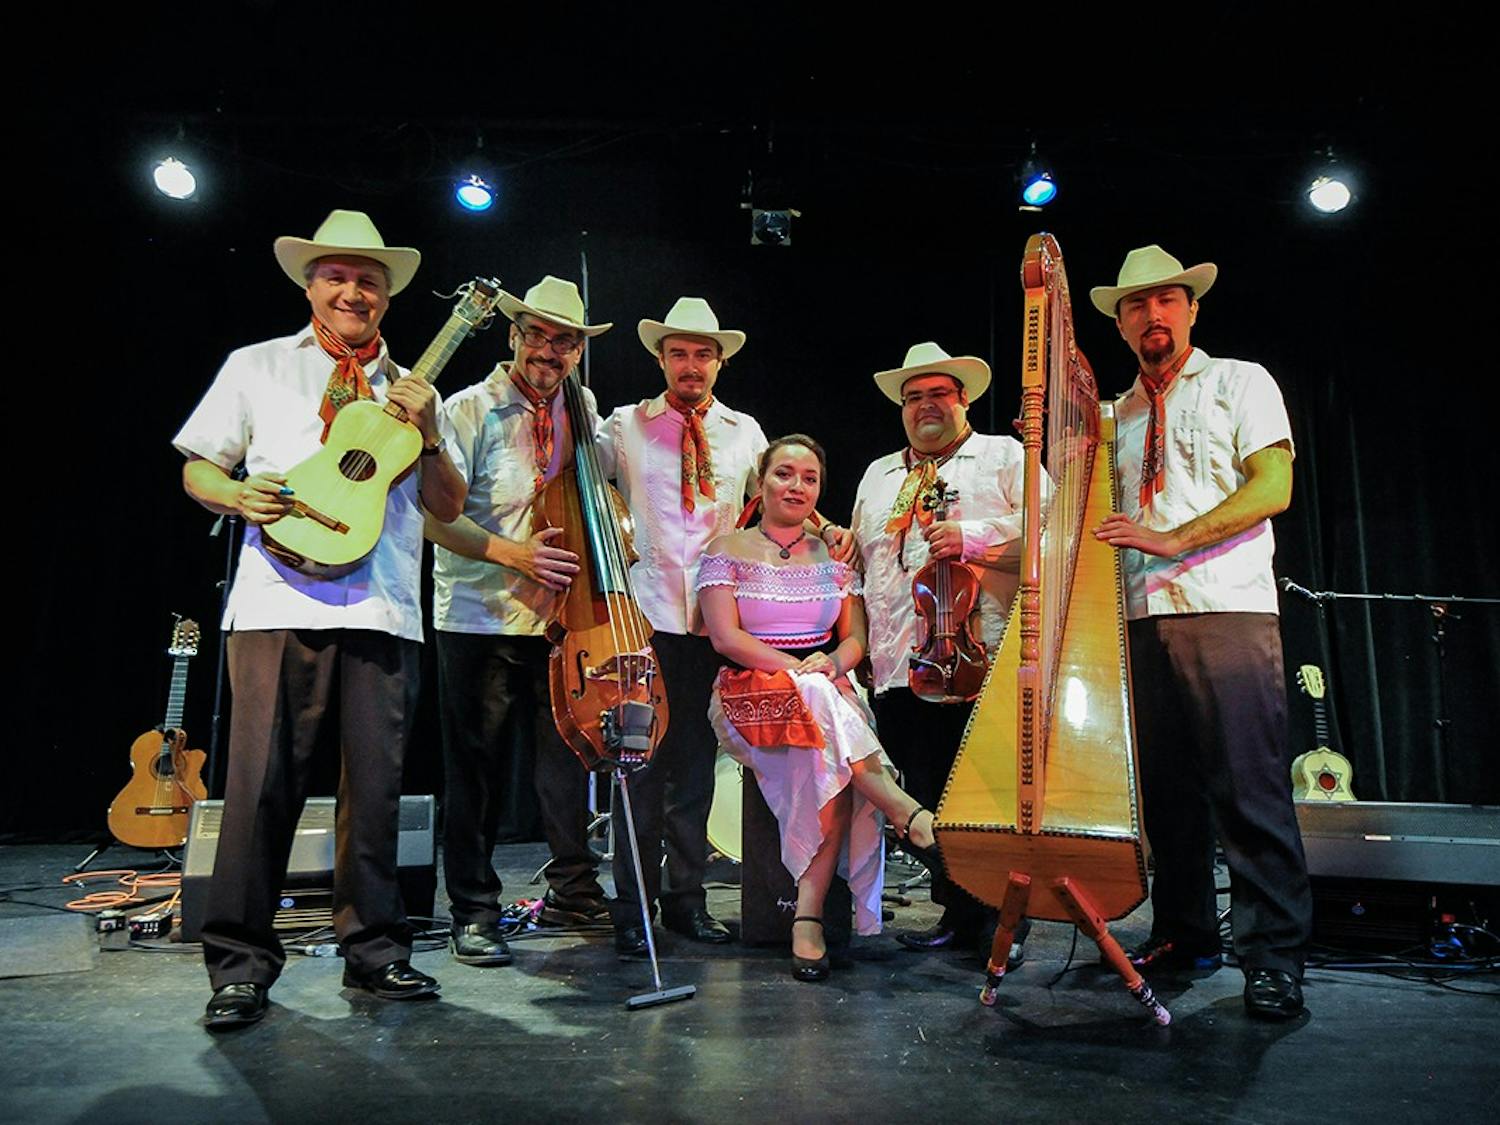 Sones de México Ensemble, pictured, will be hosting the Sones de México Ensemble Concert &amp; Workshop at the Stone Center on Friday, Sept. 9, 2022.
Photo Courtesy of Juan Dies and Photo by Henry Fajardo.